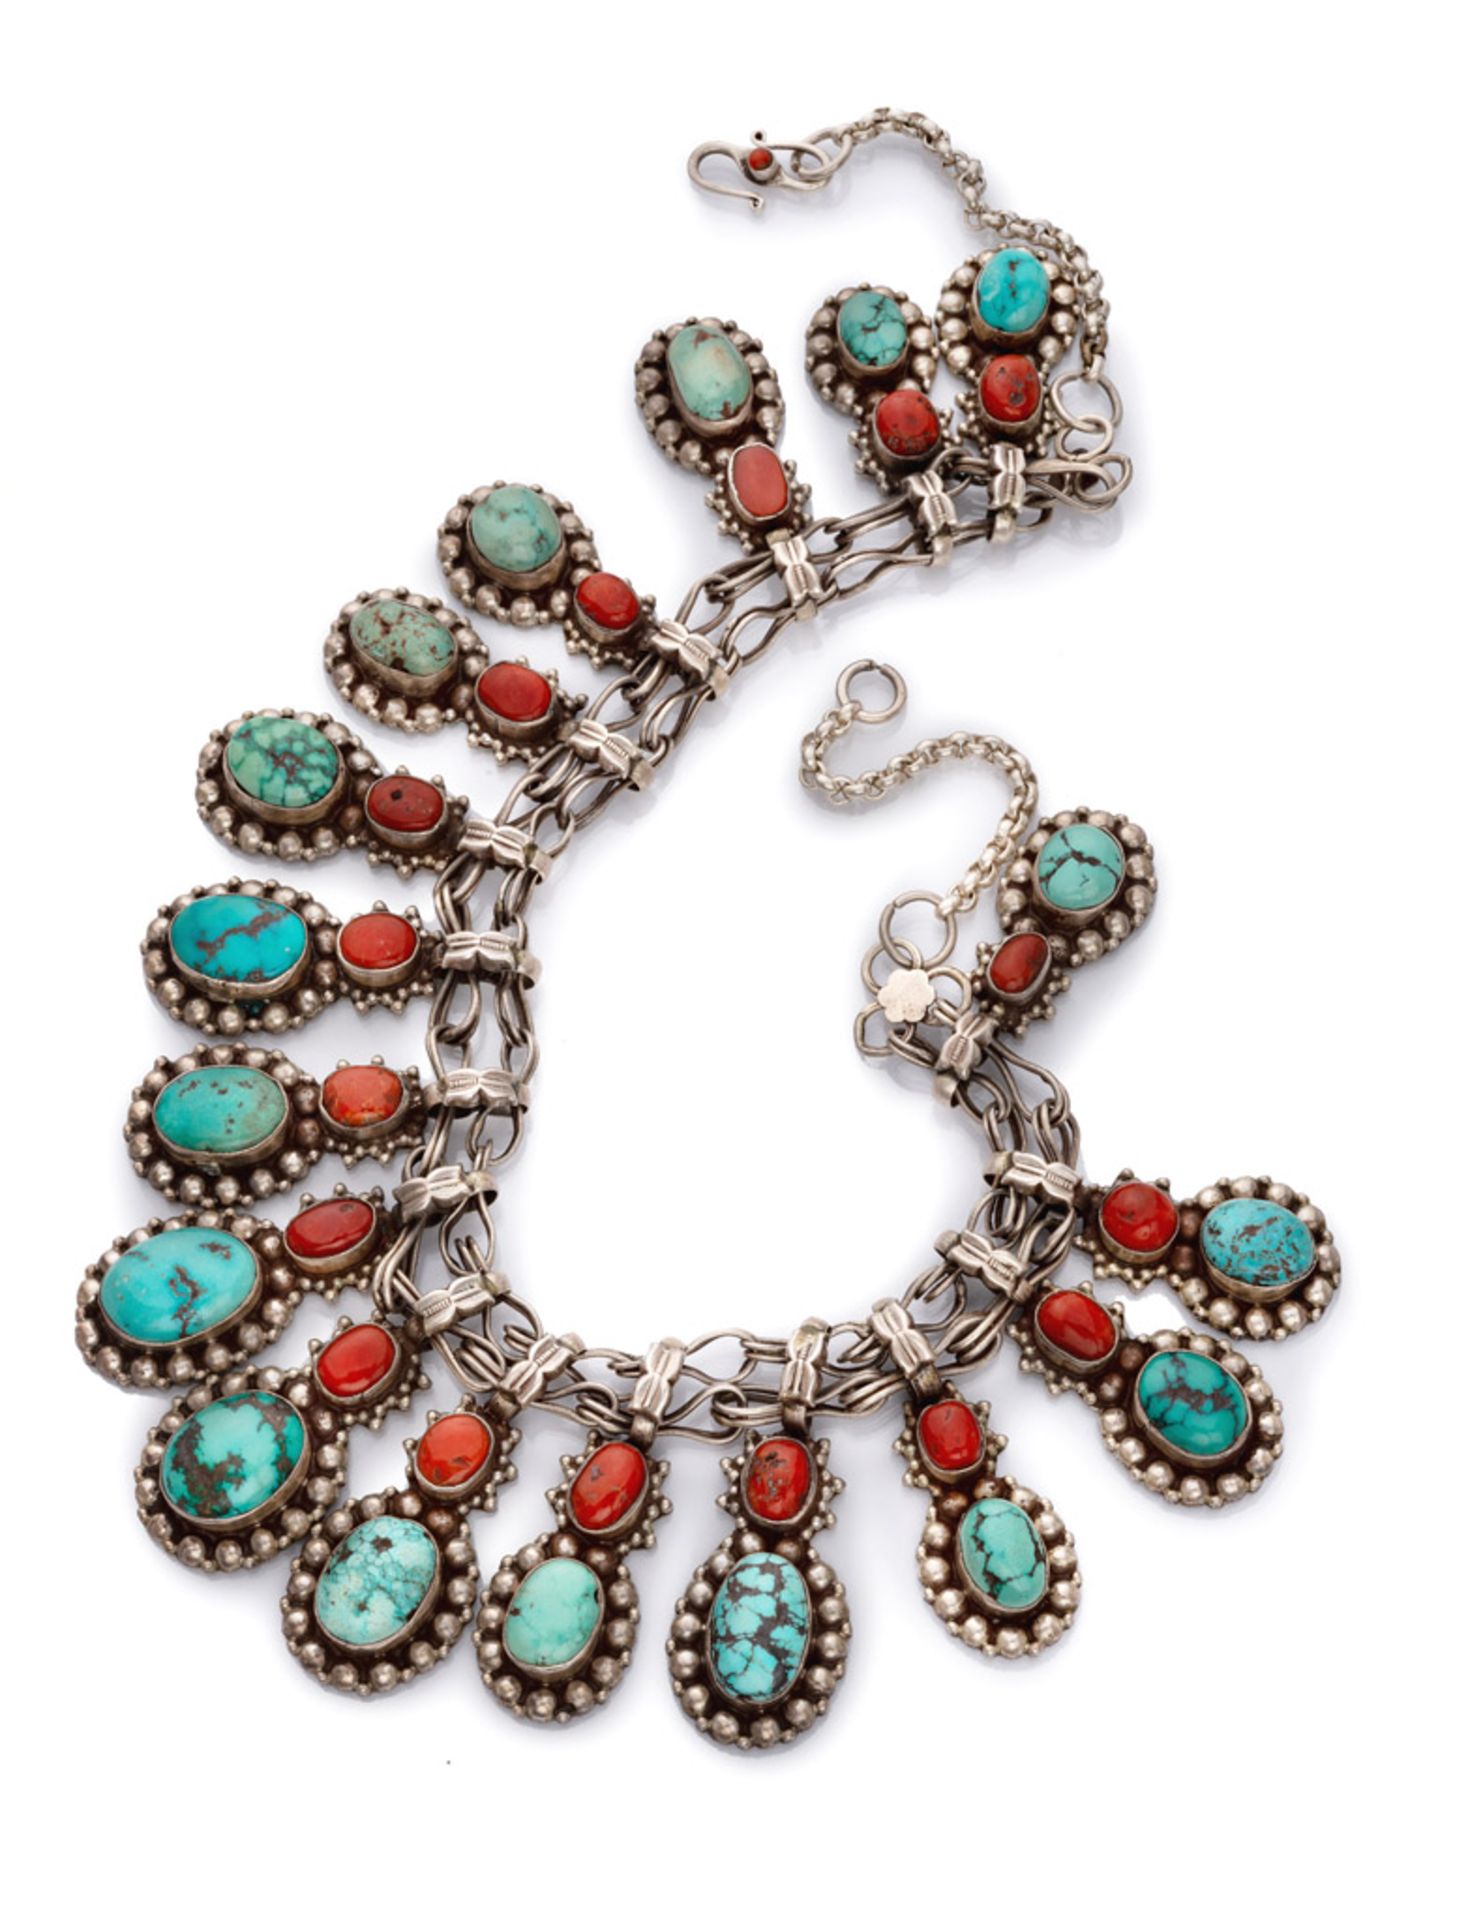 NECKLACE in silver with pendants of turquoises and red corals. Length cm. 45, total weight gr.